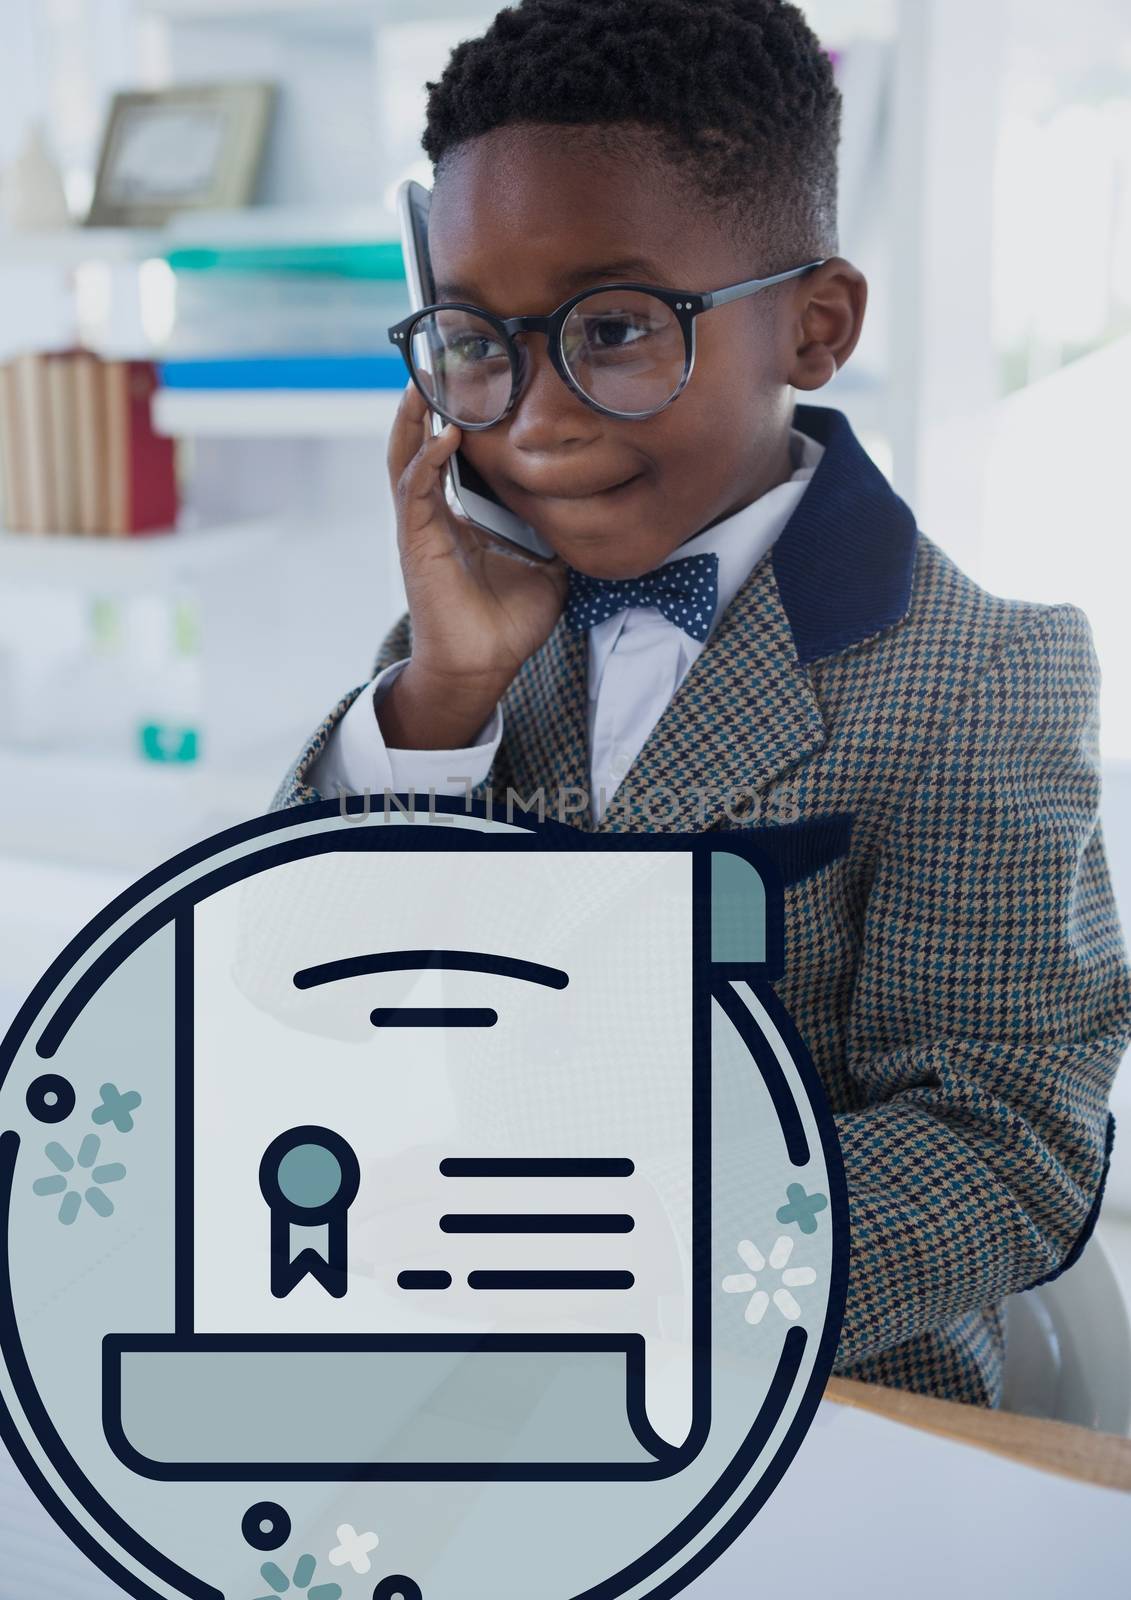 Education icons against office kid boy talking on the phone background by Wavebreakmedia